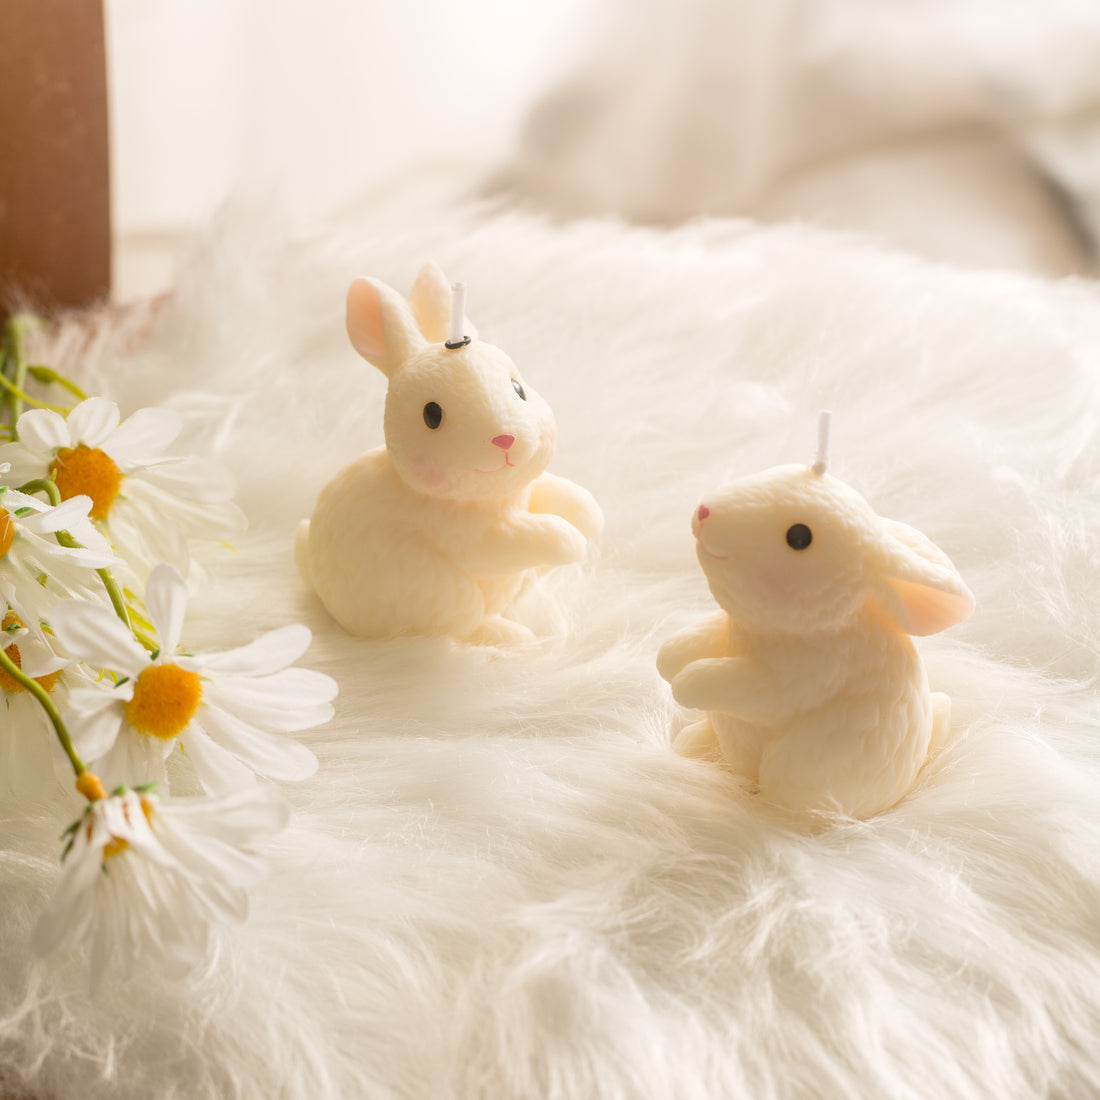 Cute Bunny Candle is perfect animal candle home decor